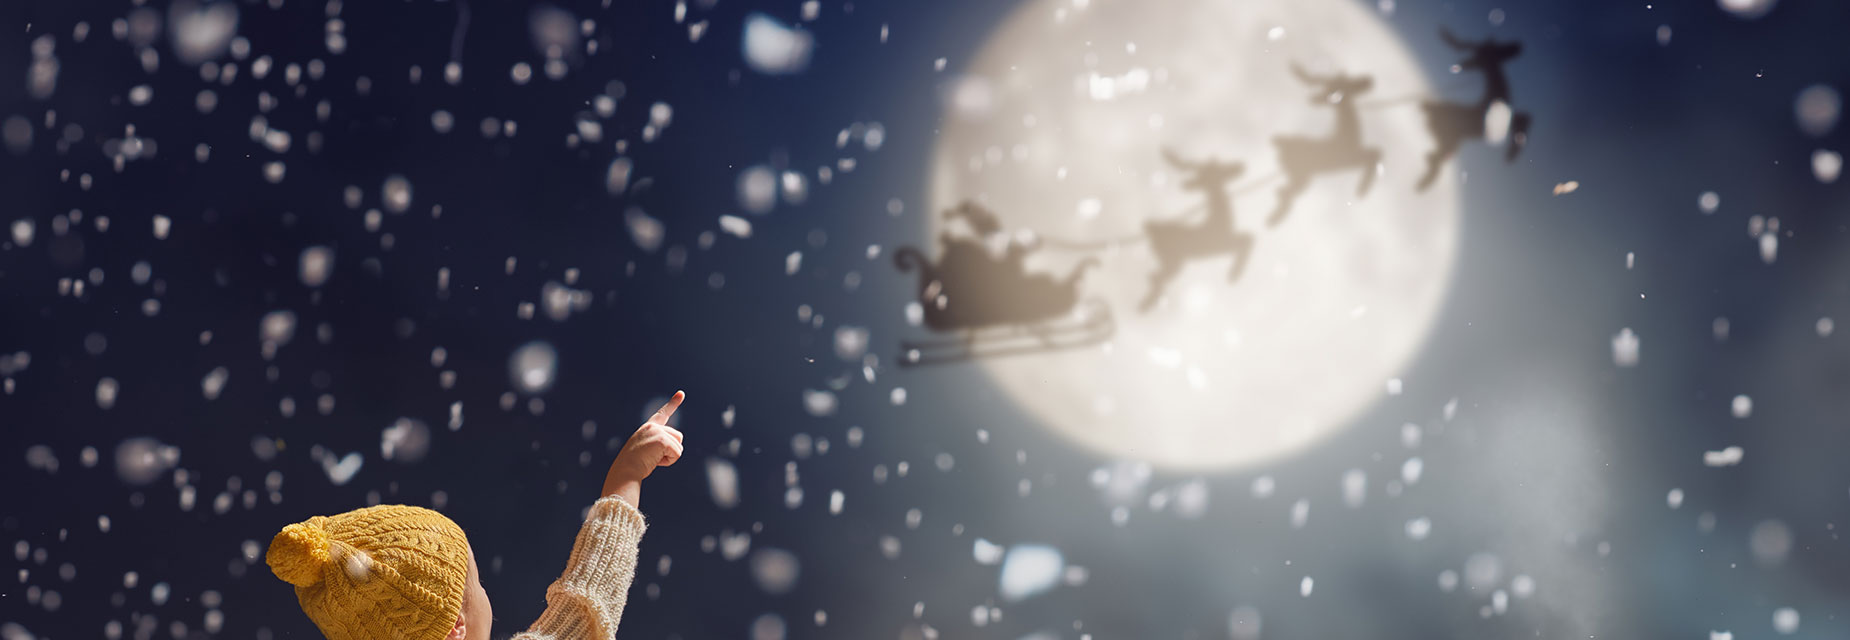 child pointing and Santa passing the moon 